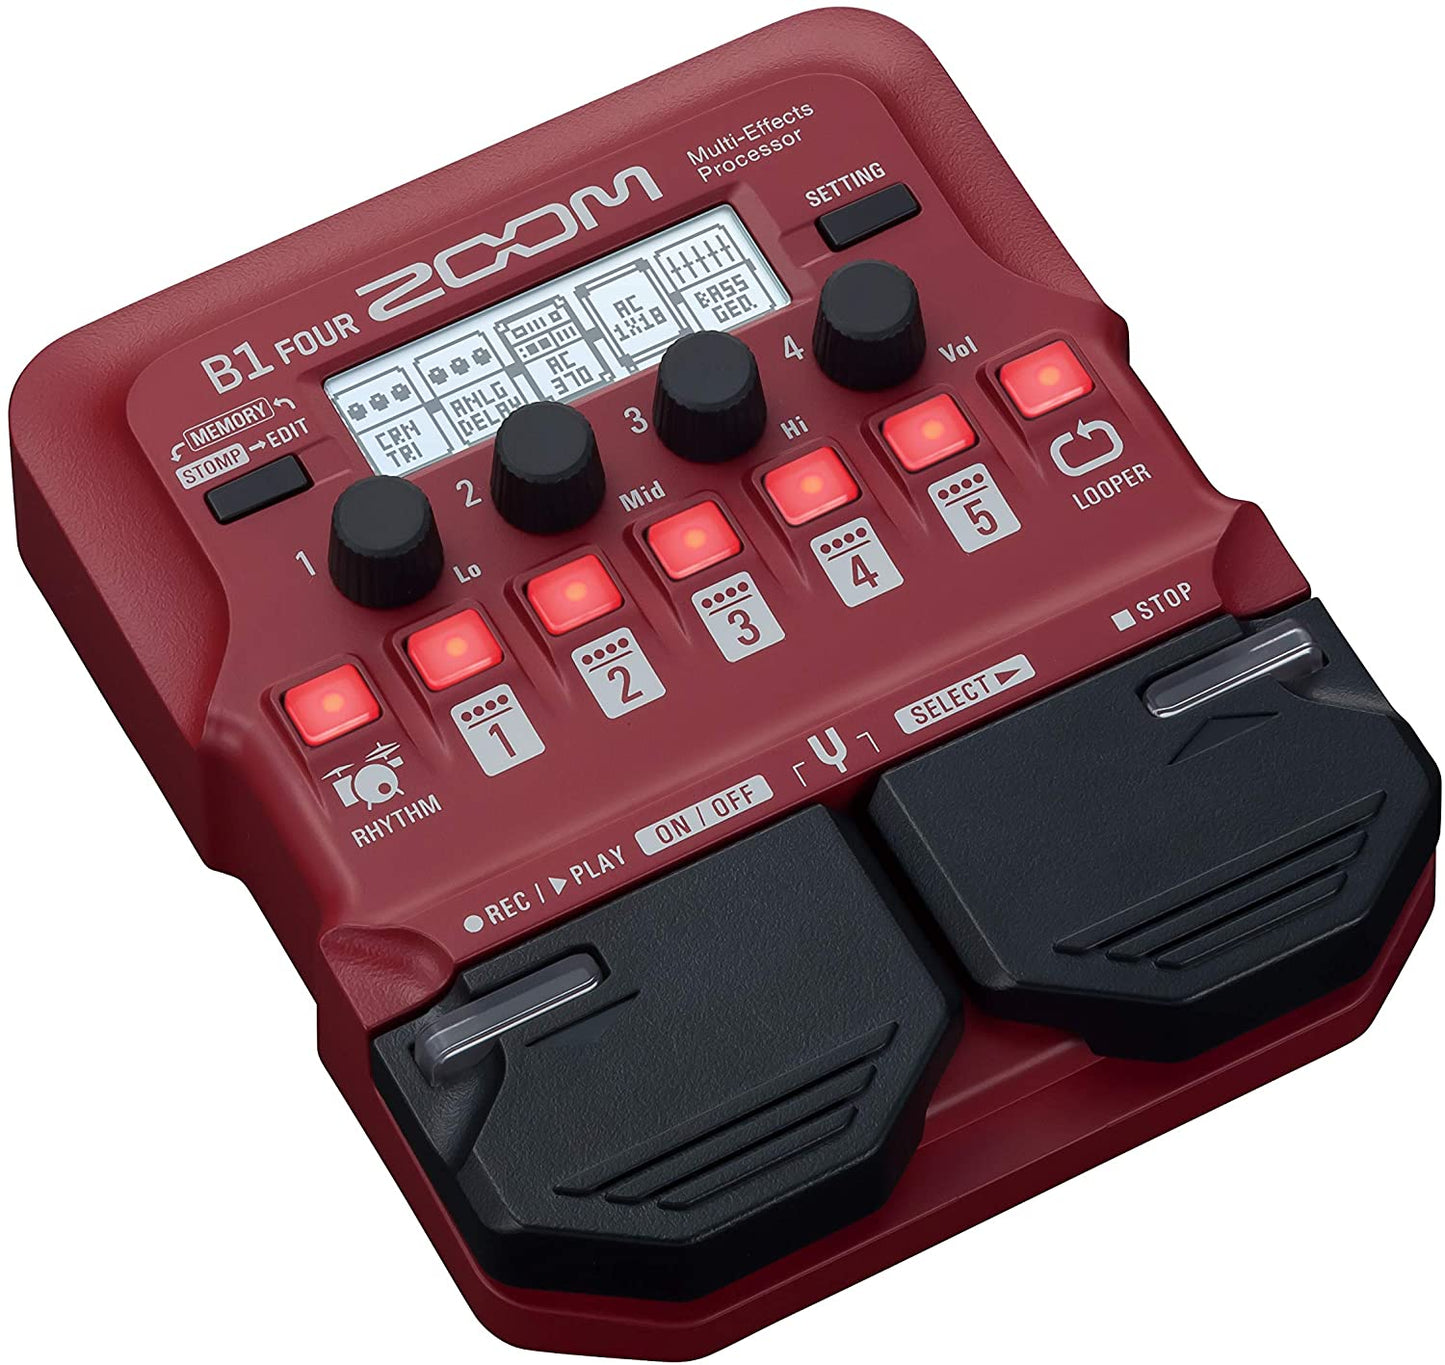 Zoom B1 FOUR Bass Guitar Multi-Effects Processor Pedal, With 60+ Built-in Effects, Amp Modeling, Looper, Rhythm Section, Tuner, Battery Powered